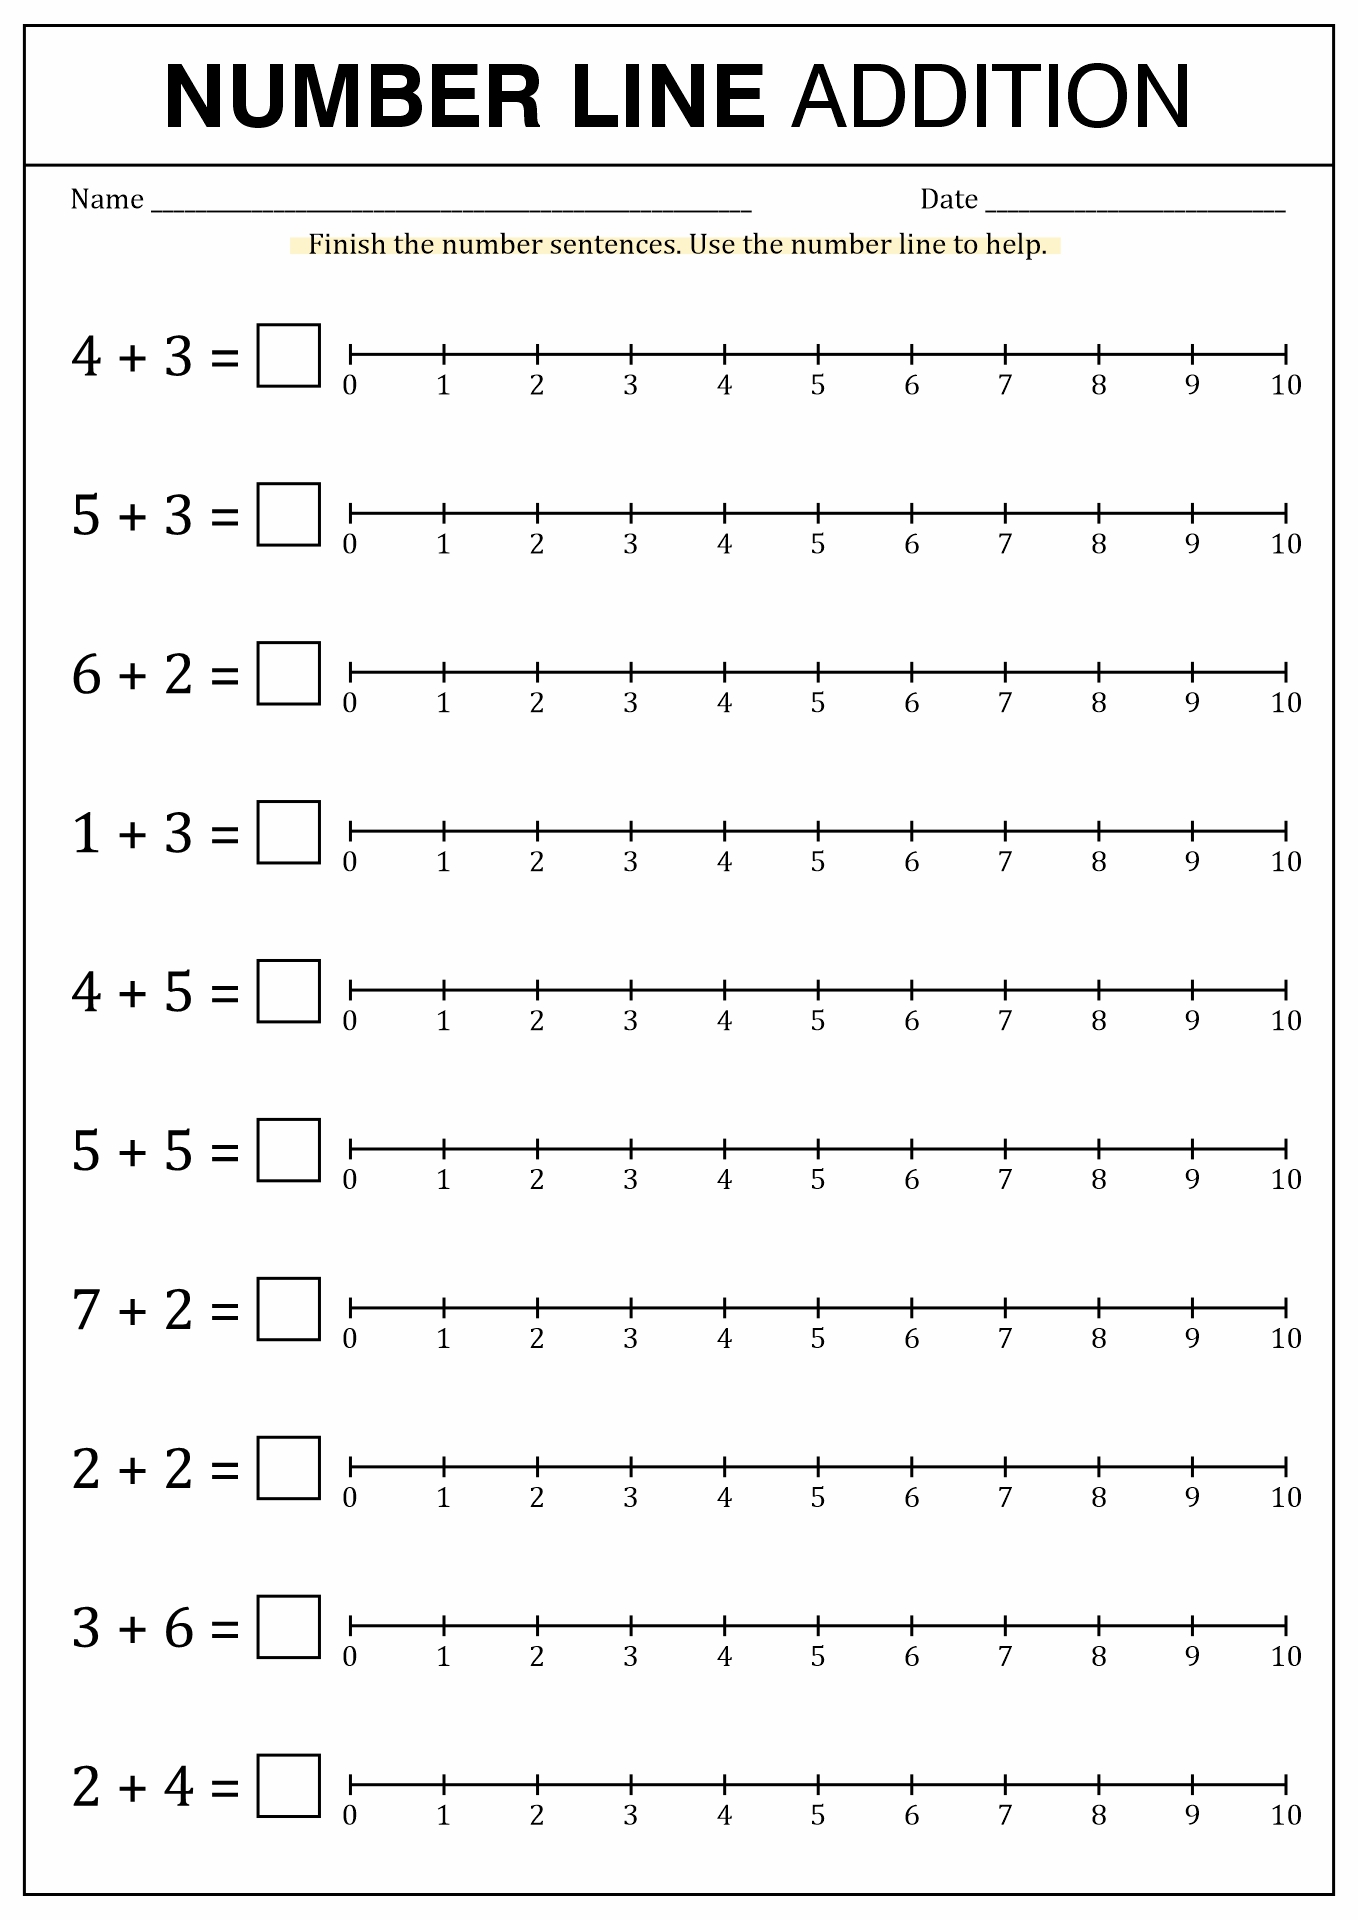 13 Best Images Of Blank Place Value Worksheets Place Value Chart With Decimals Place Value